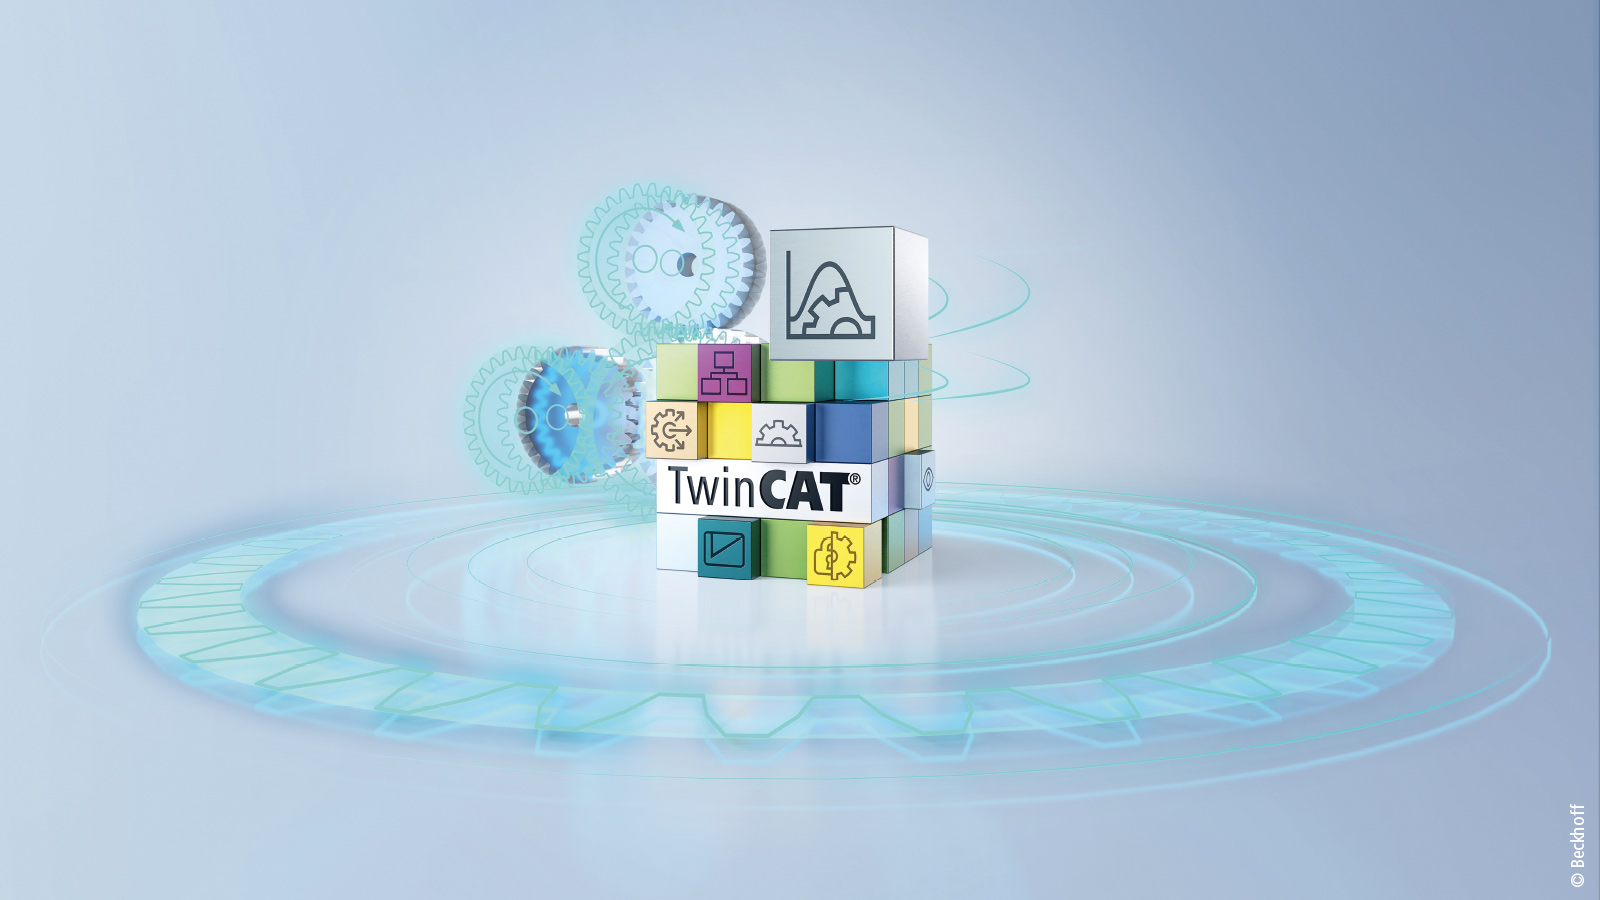 TwinCAT MC3 is a new generation of motion control that offers all the advantages of a modular architecture.